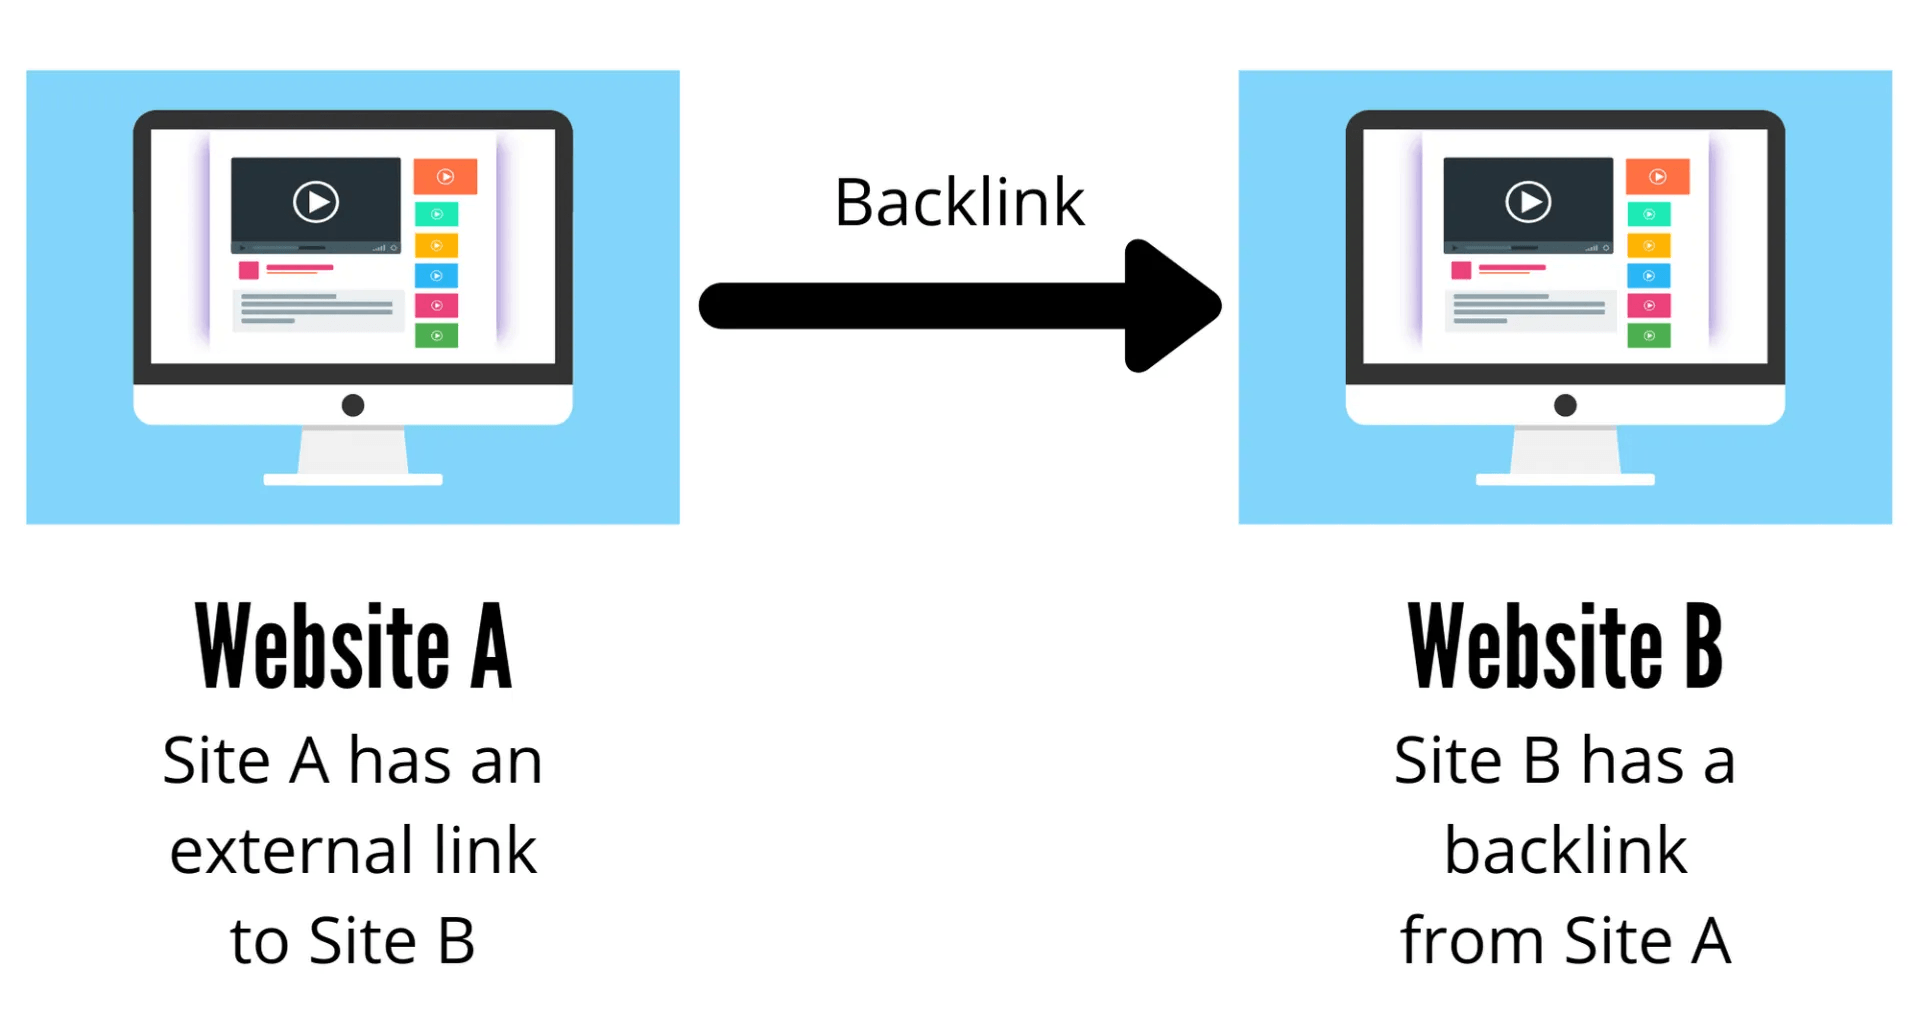 Are backlinks still important for SEO in 2022?